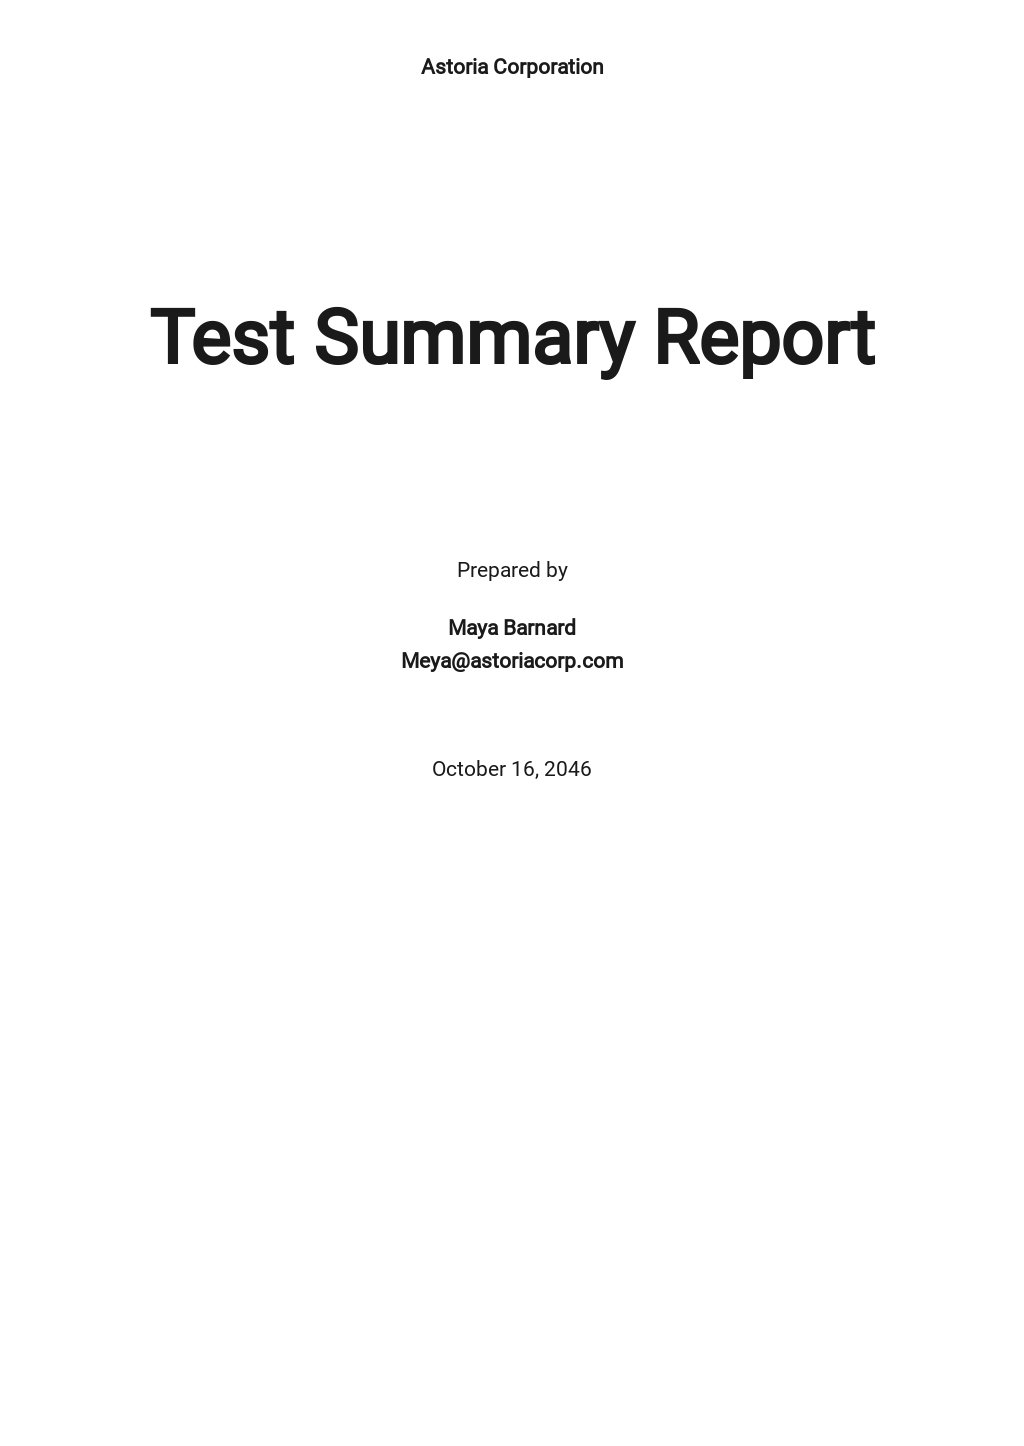 22+ Summary Report Templates - Free Downloads  Template.net Pertaining To Test Summary Report Template